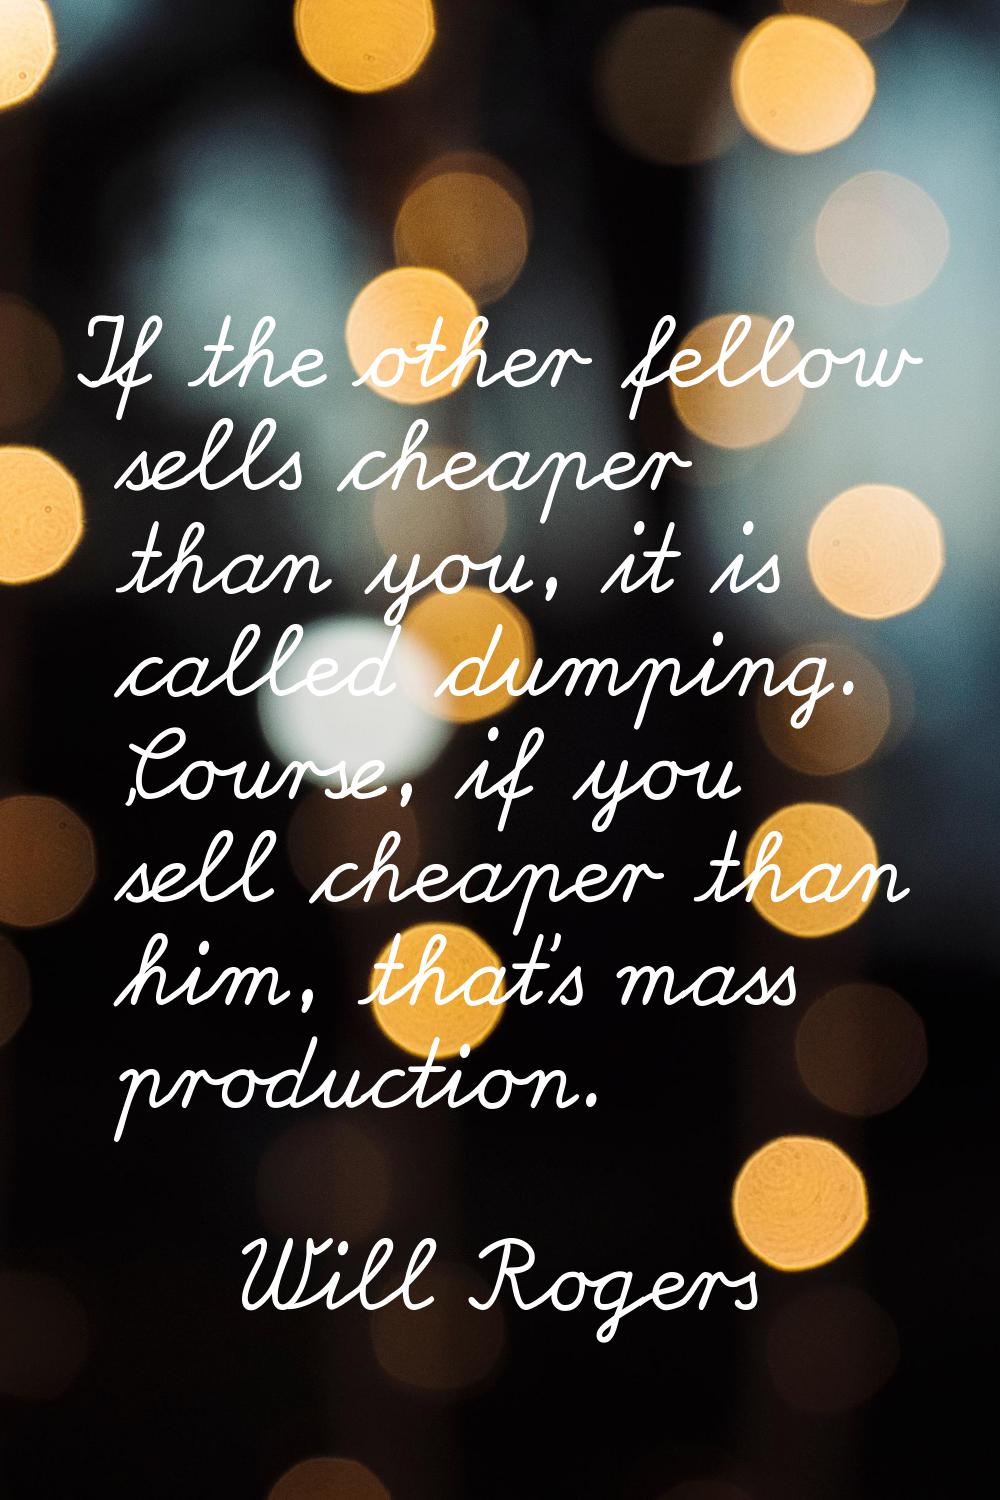 If the other fellow sells cheaper than you, it is called dumping. 'Course, if you sell cheaper than